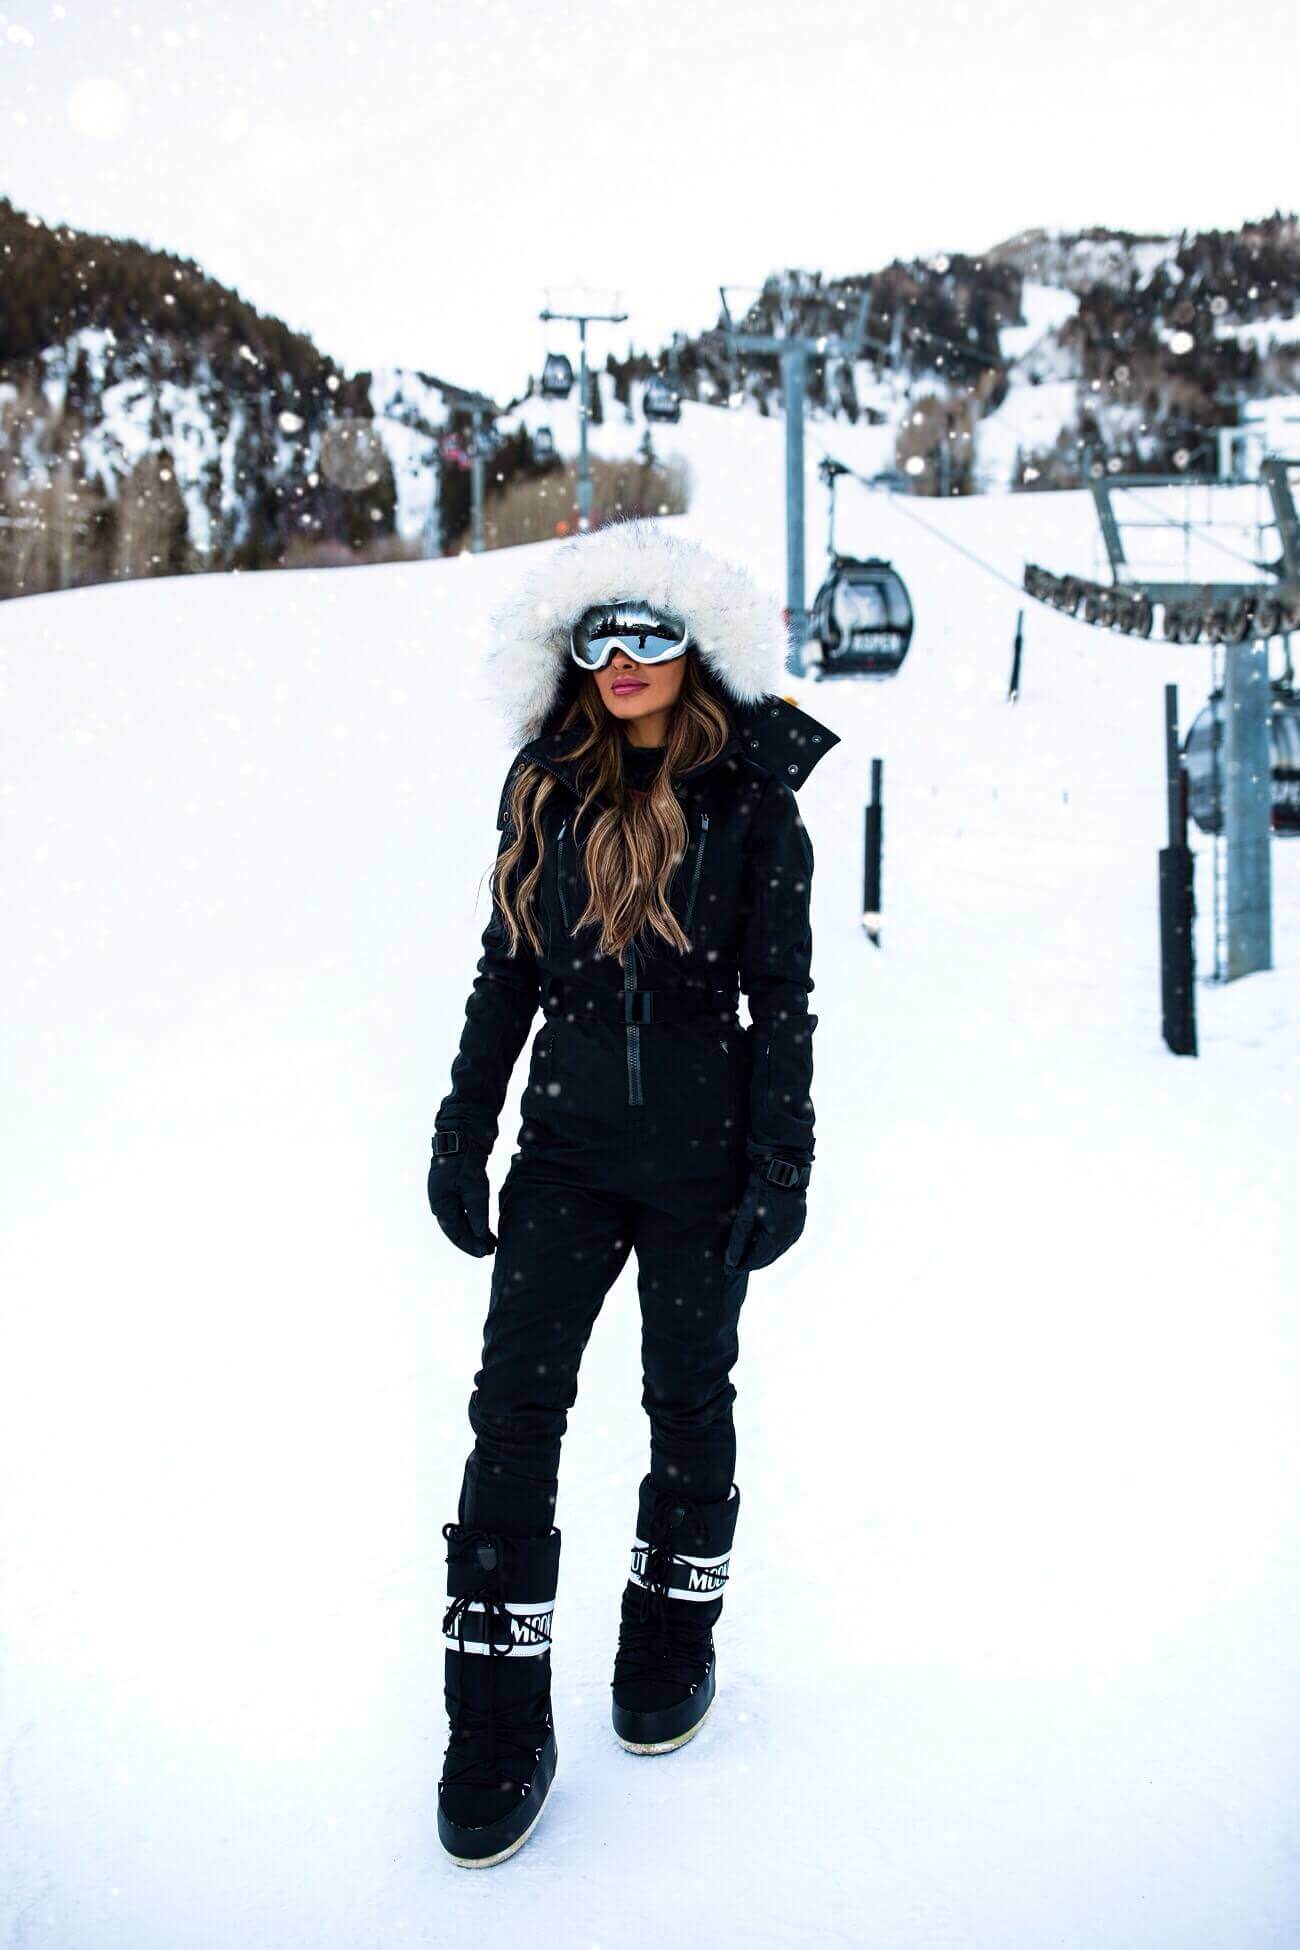 wantering-blog: “3 Ski Lodge Outfits to Wear in Aspen Nail the Après-ski  look this